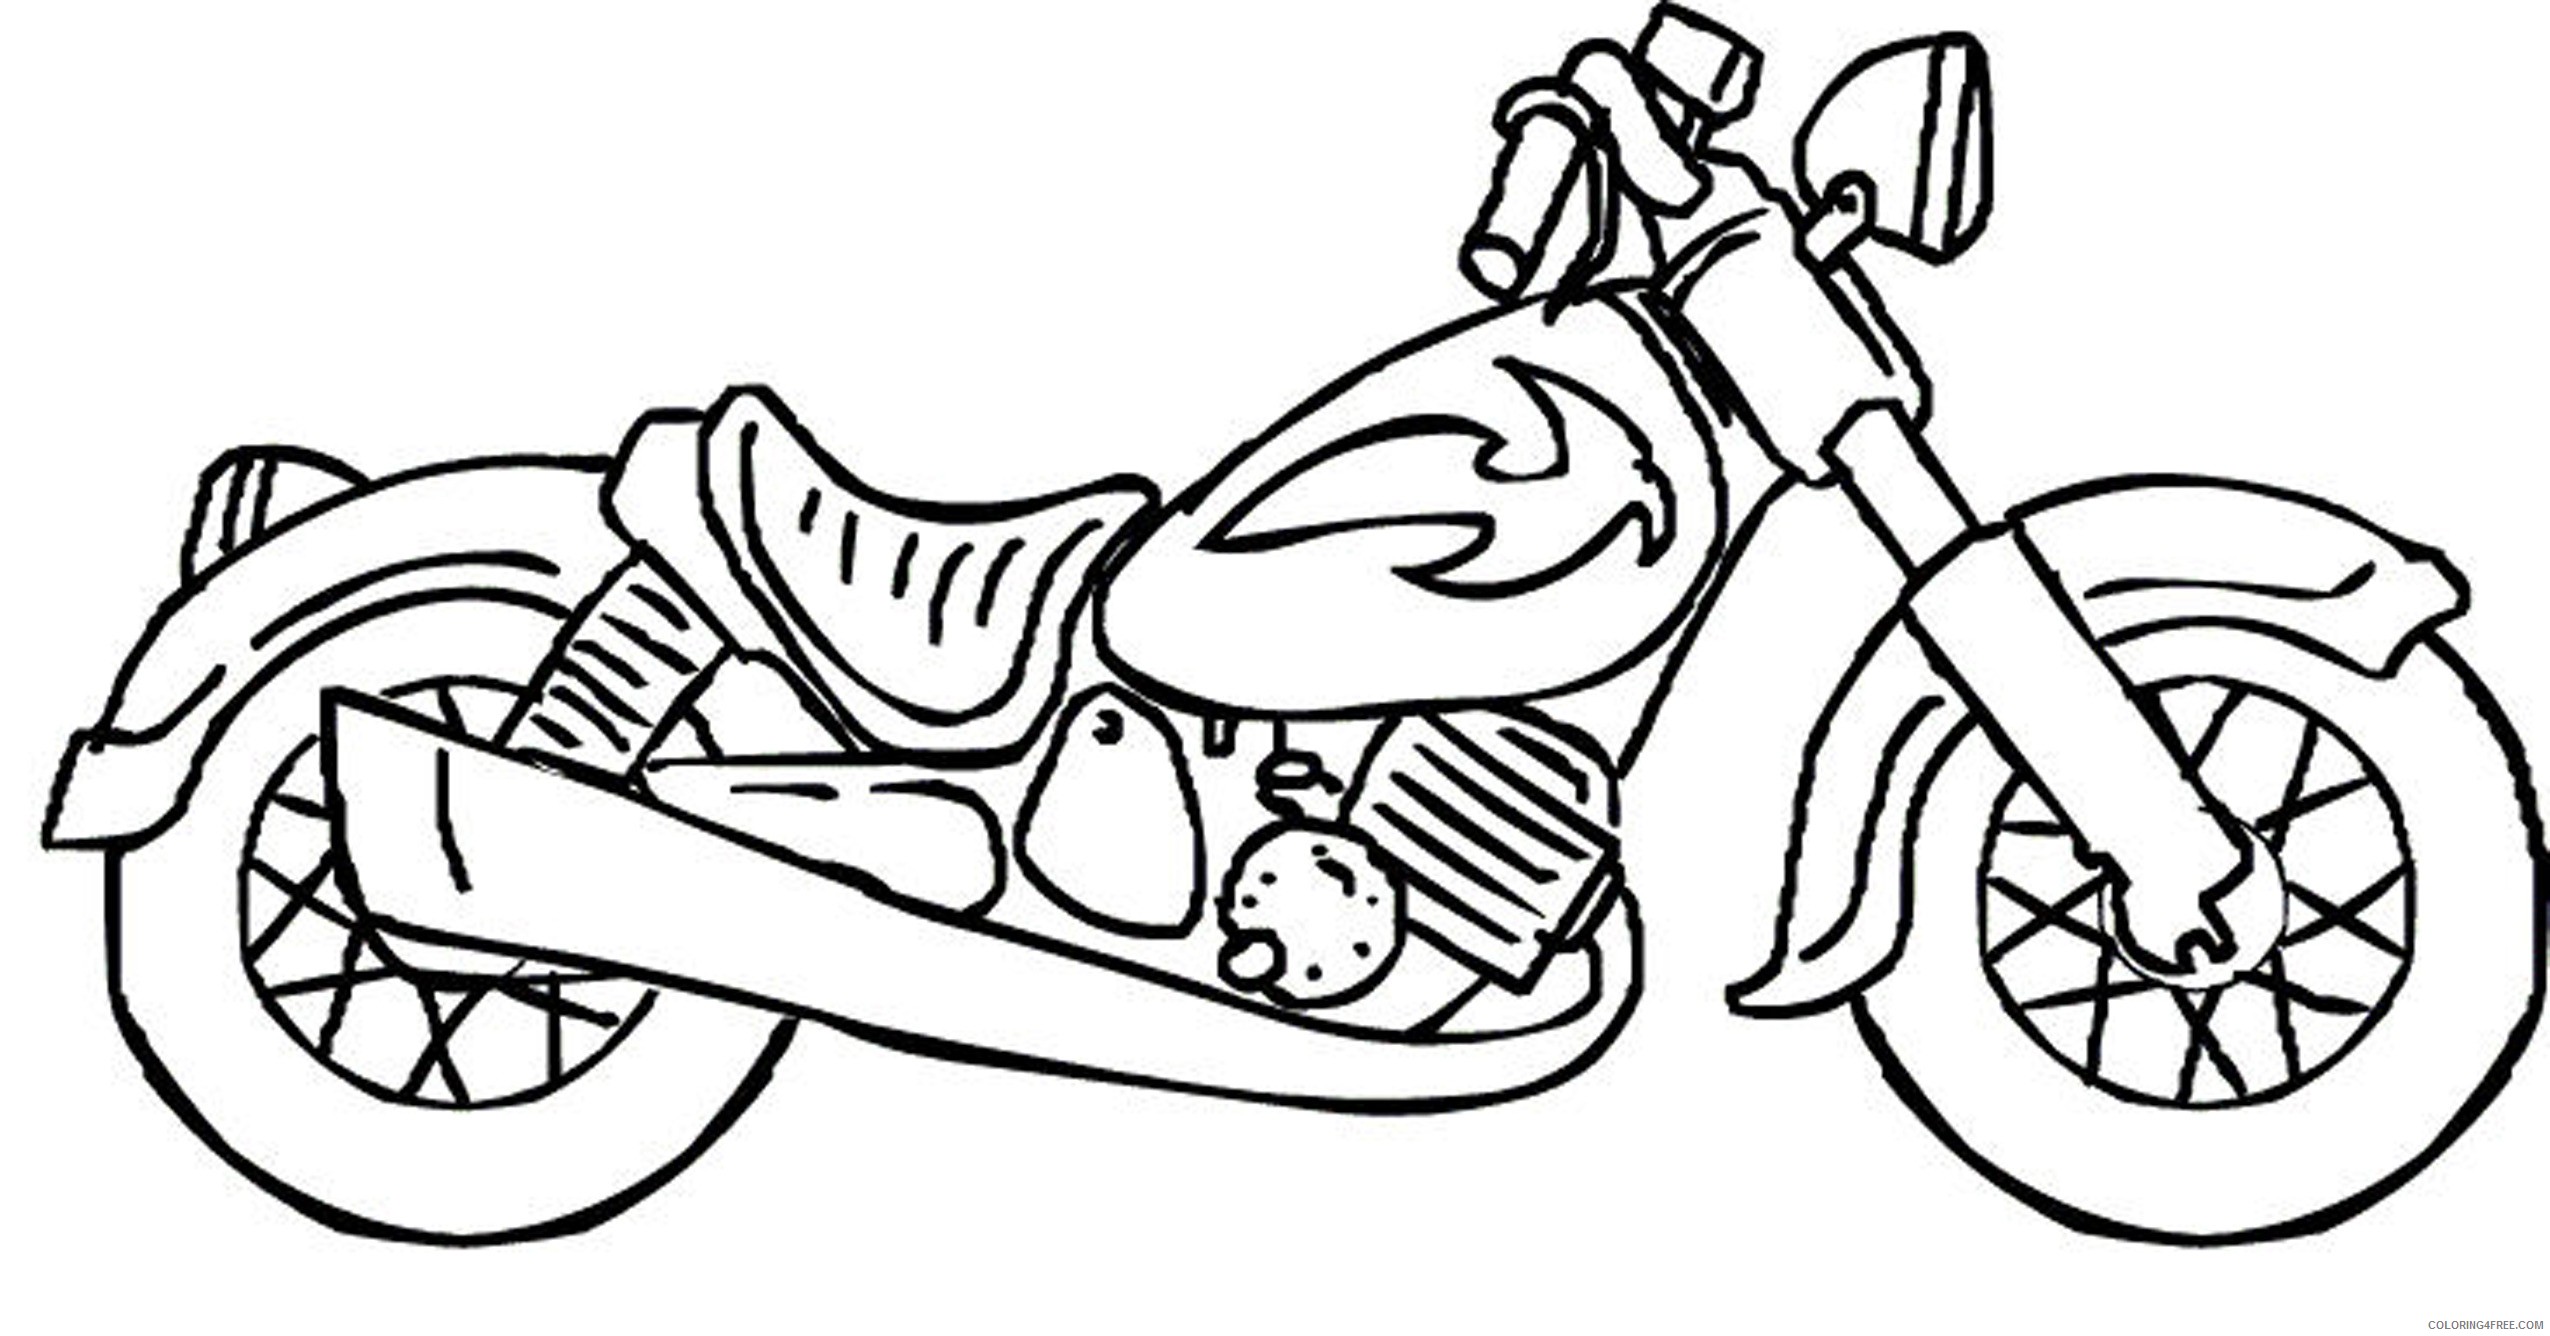 Motorcycle Coloring Pages For Kids Coloring4free Coloring4free Com